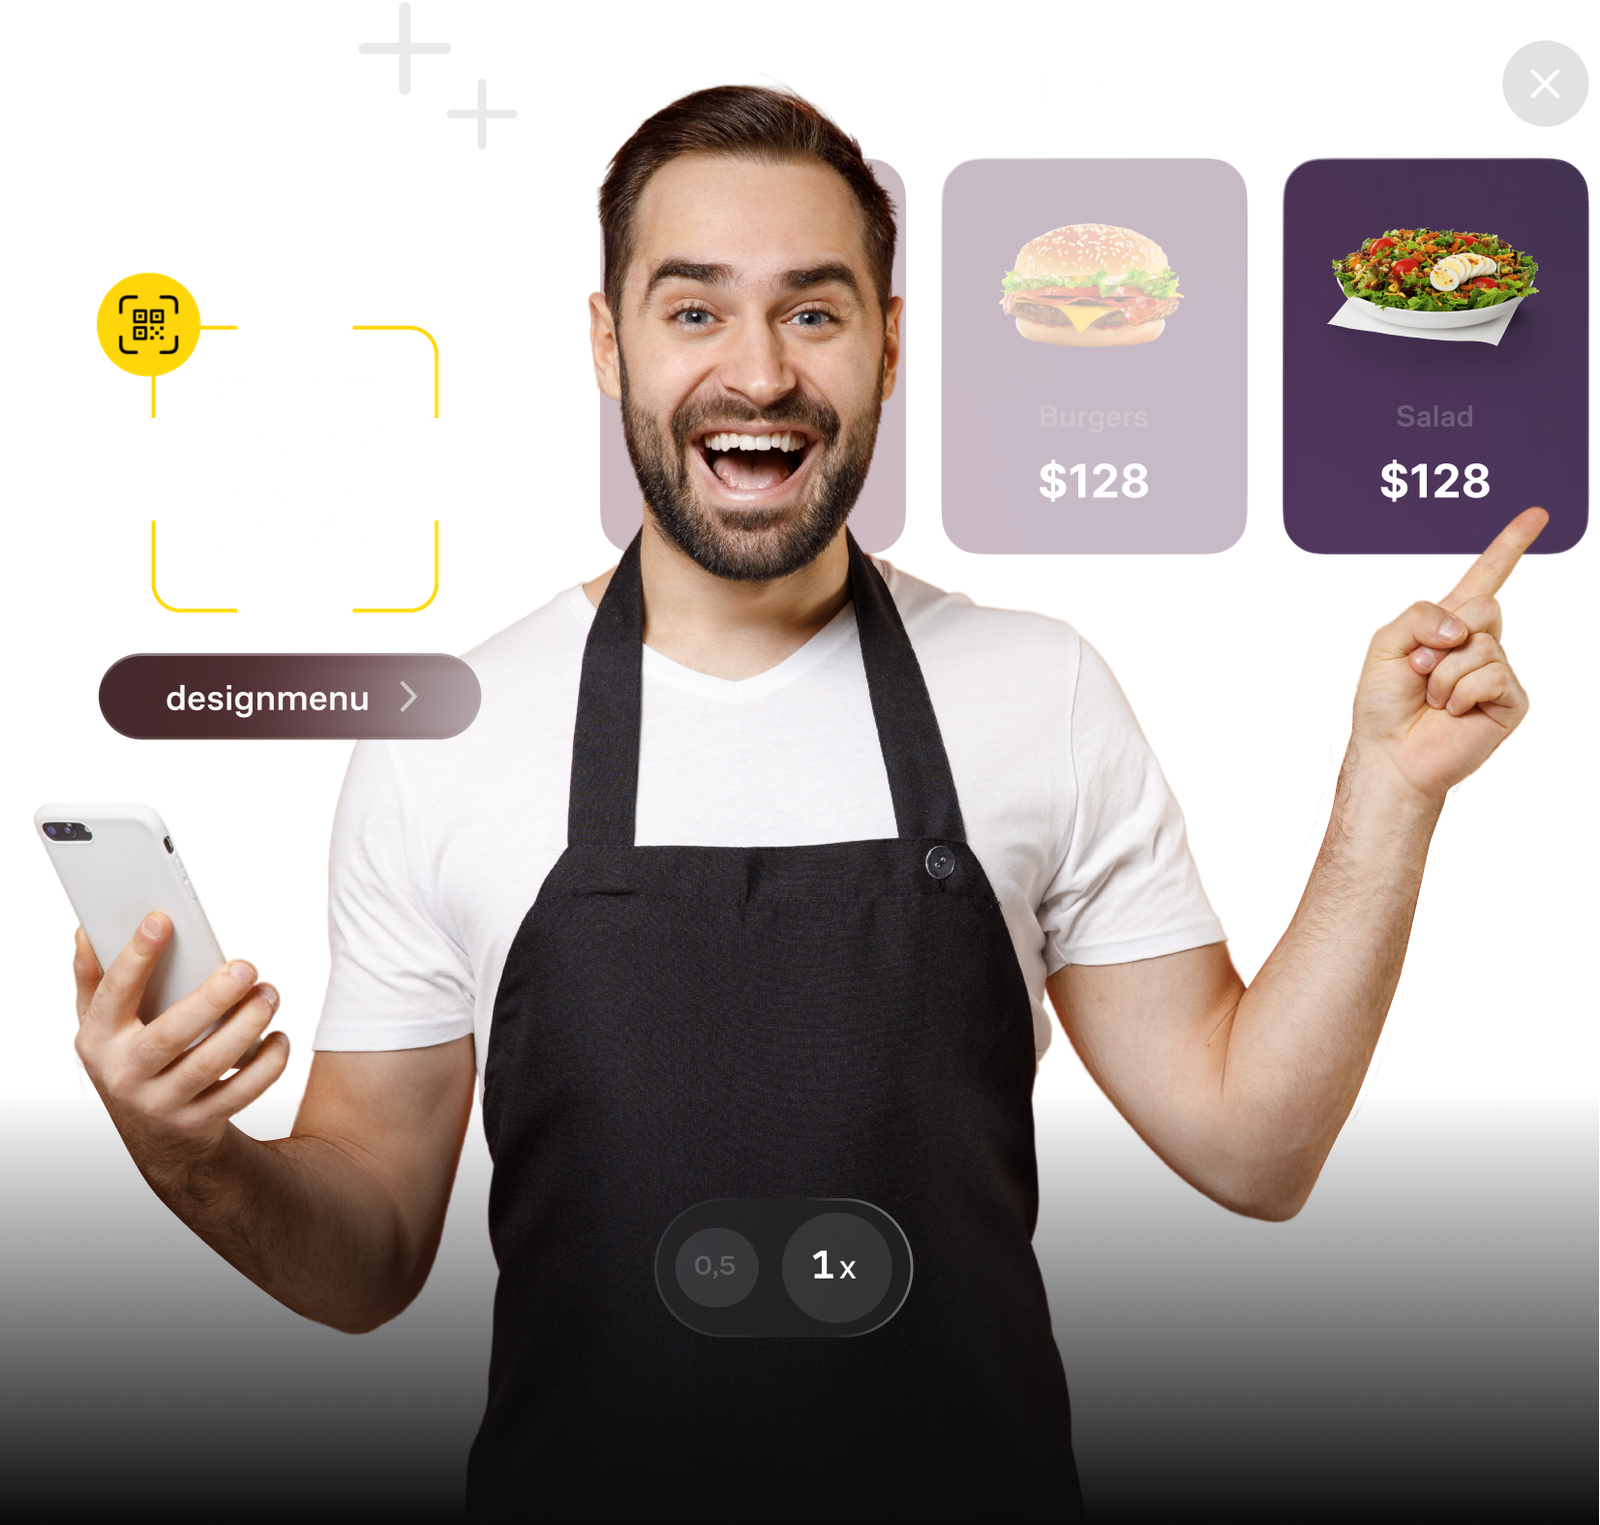 Development of on-screen menu design for mobile devices